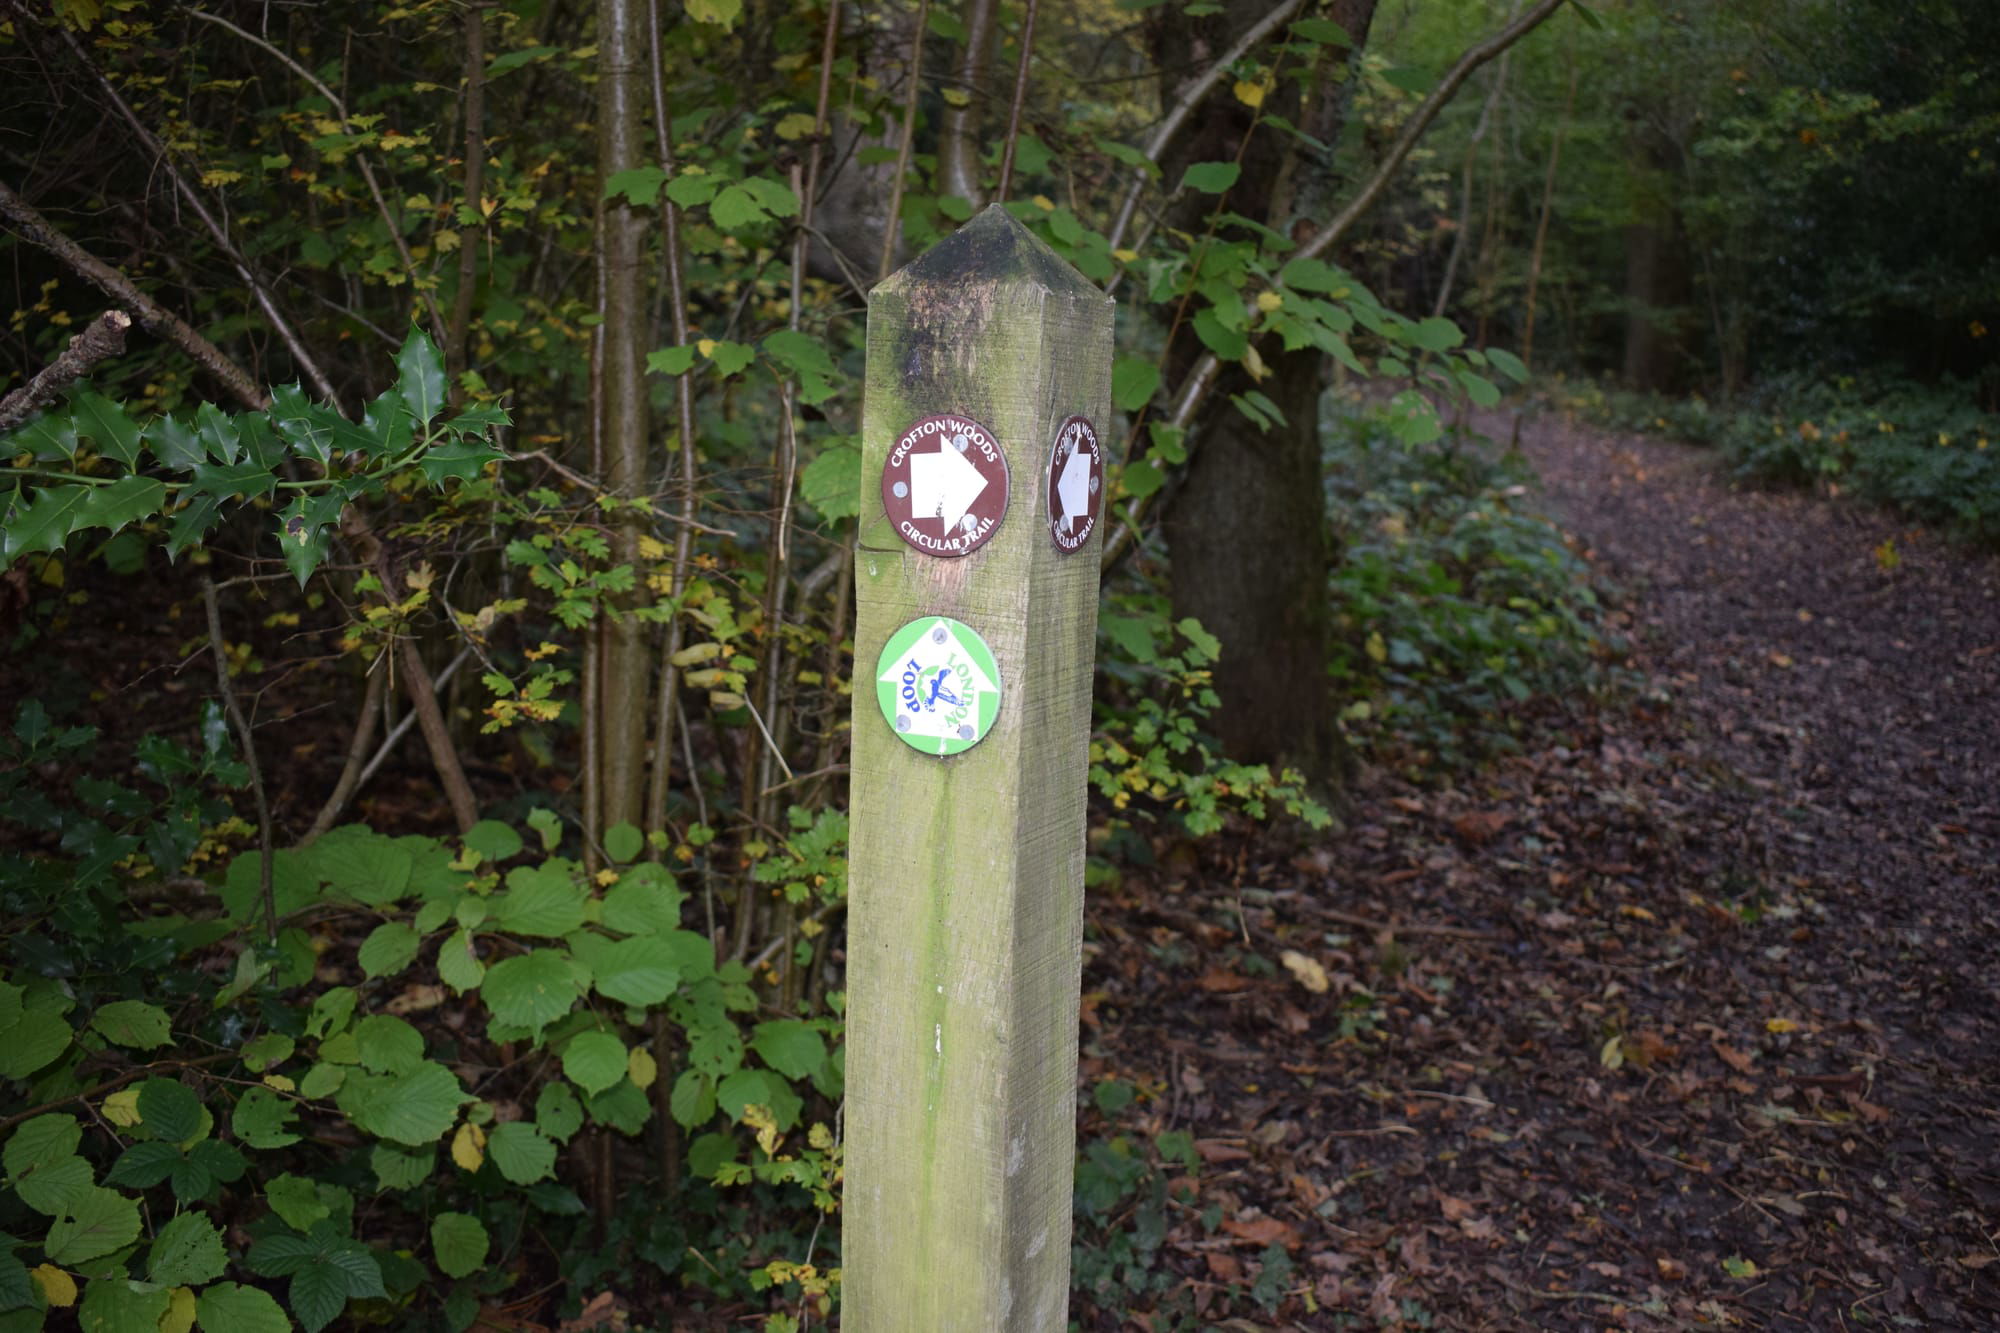 London Loop passes through the heart of the woods